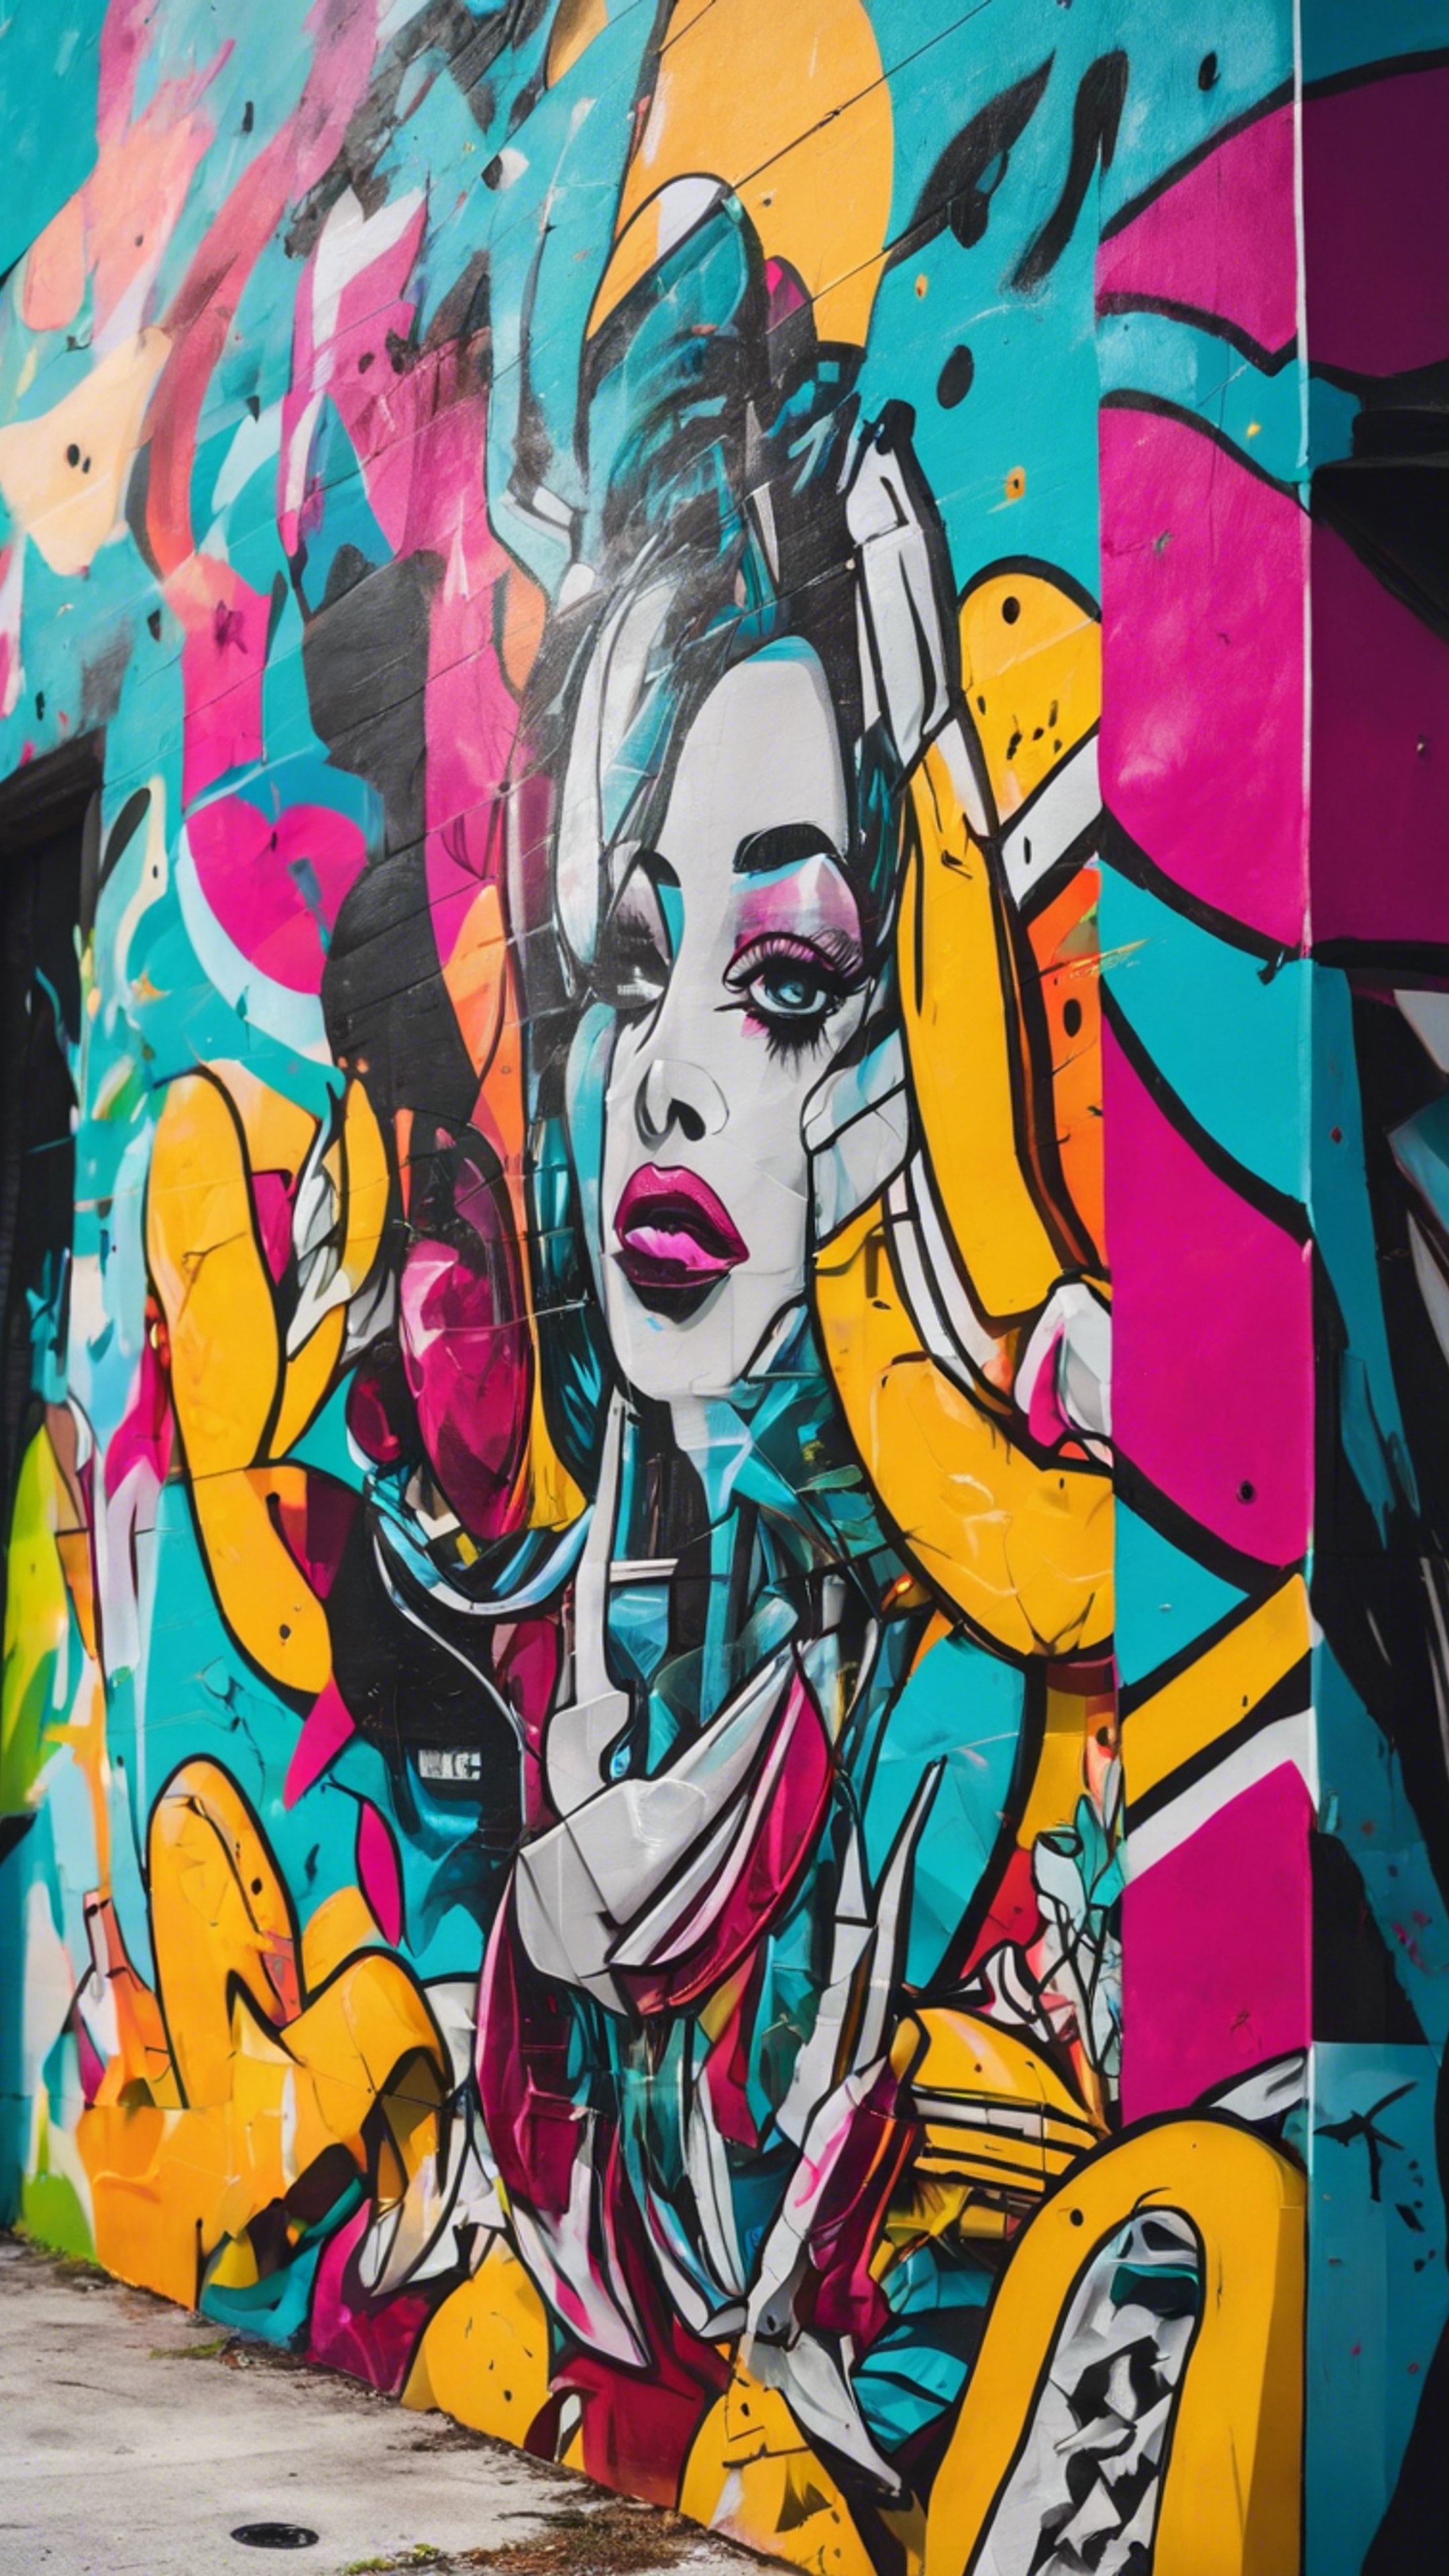 A vibrant street art mural in Wynwood, Miami, featuring abstract art and bright colors.壁紙[fc74442468964623923a]